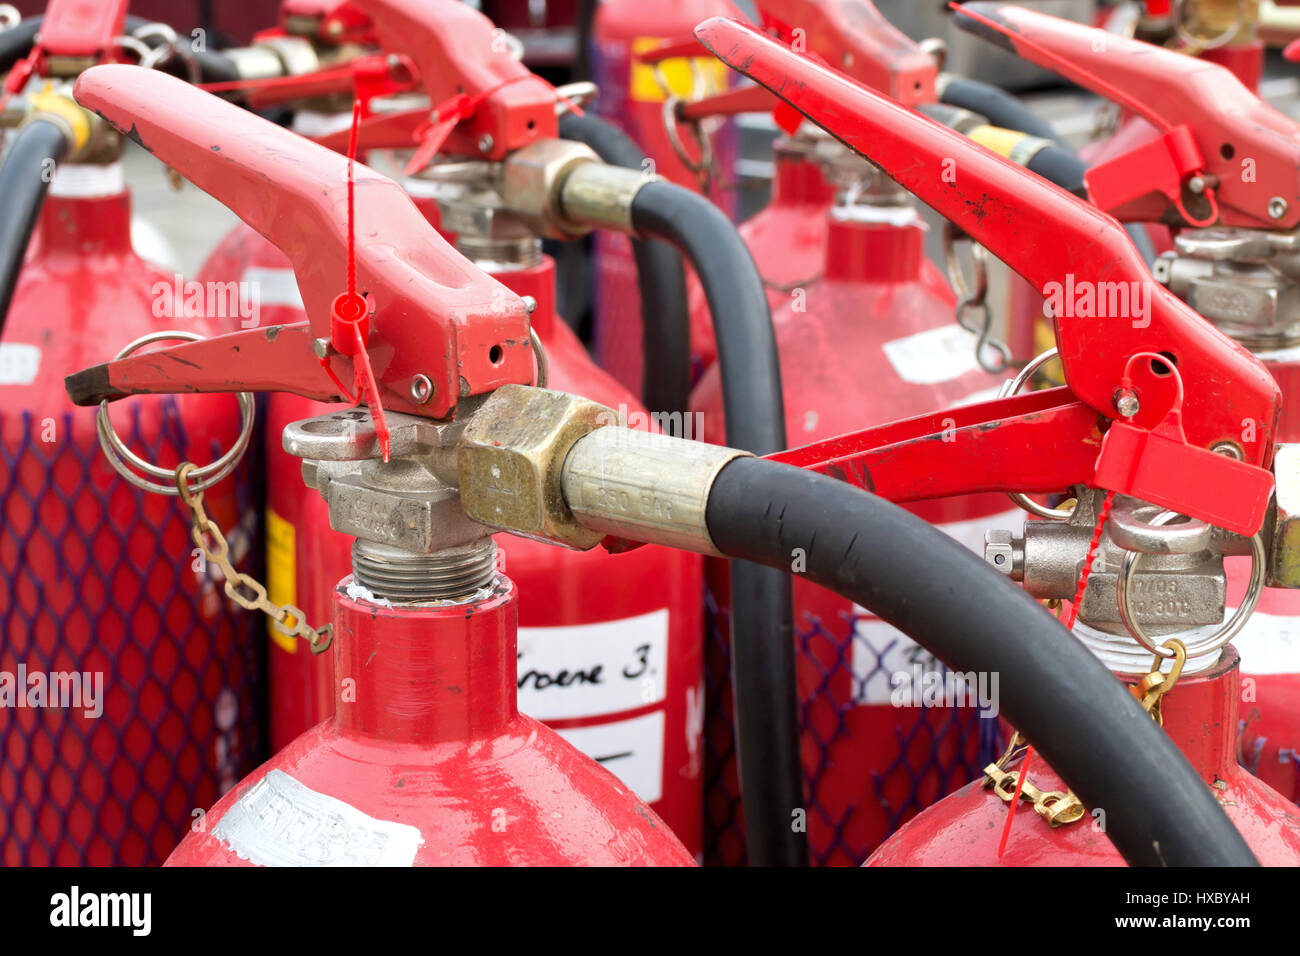 group of fire extinguishers Stock Photo